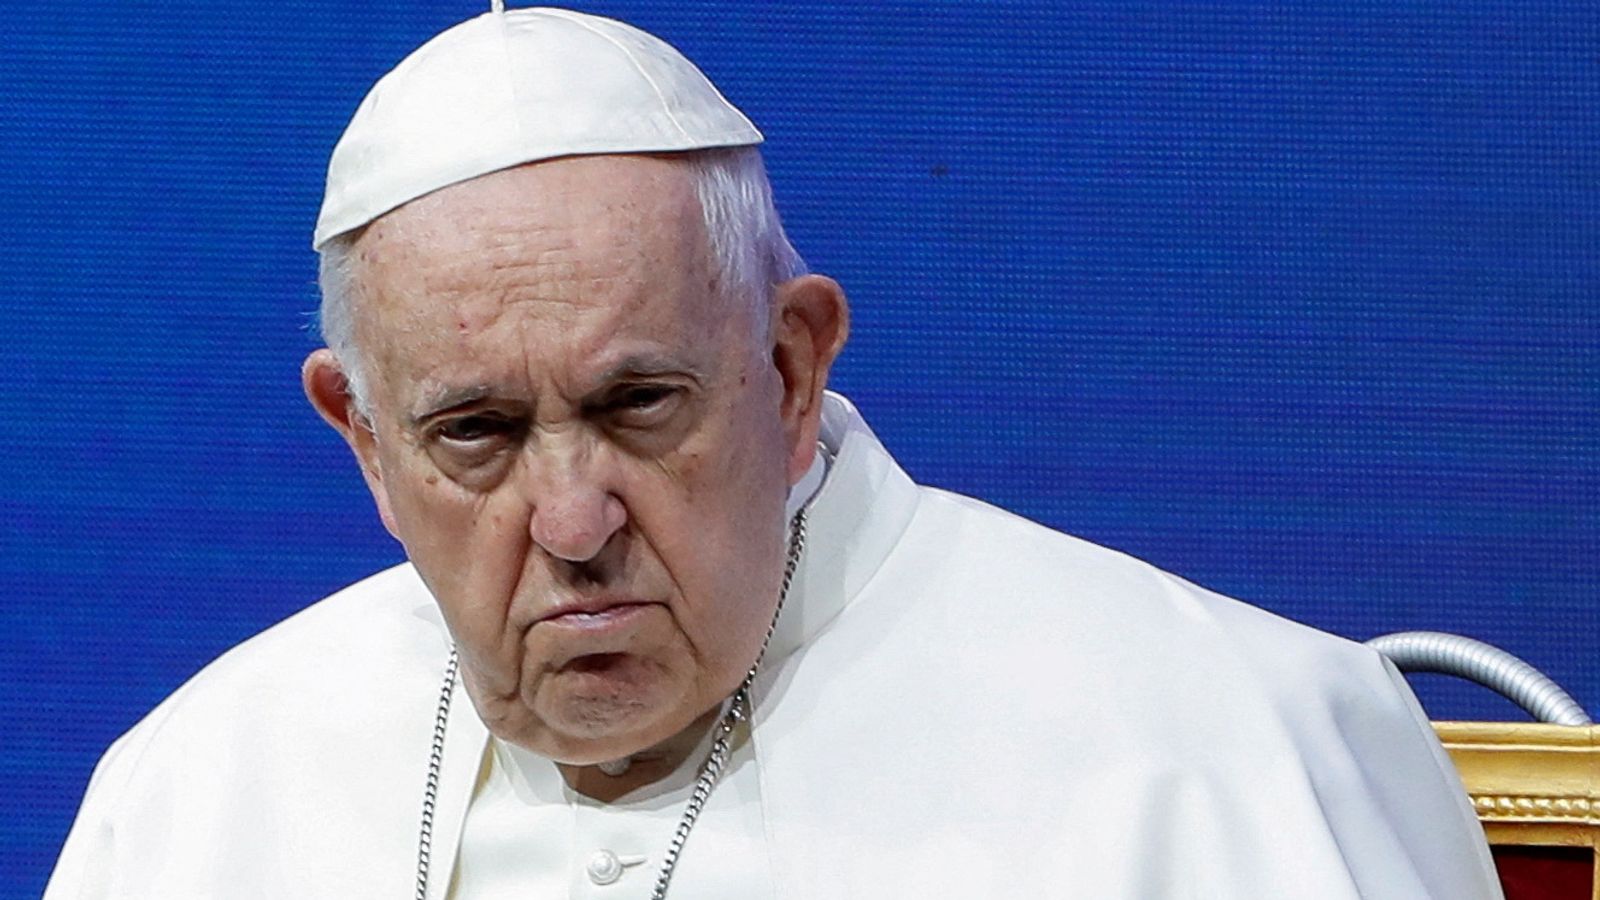 Xxx Pope All Video - Pope Francis has good second night in hospital and condition stable  following abdominal surgery | World News | Sky News